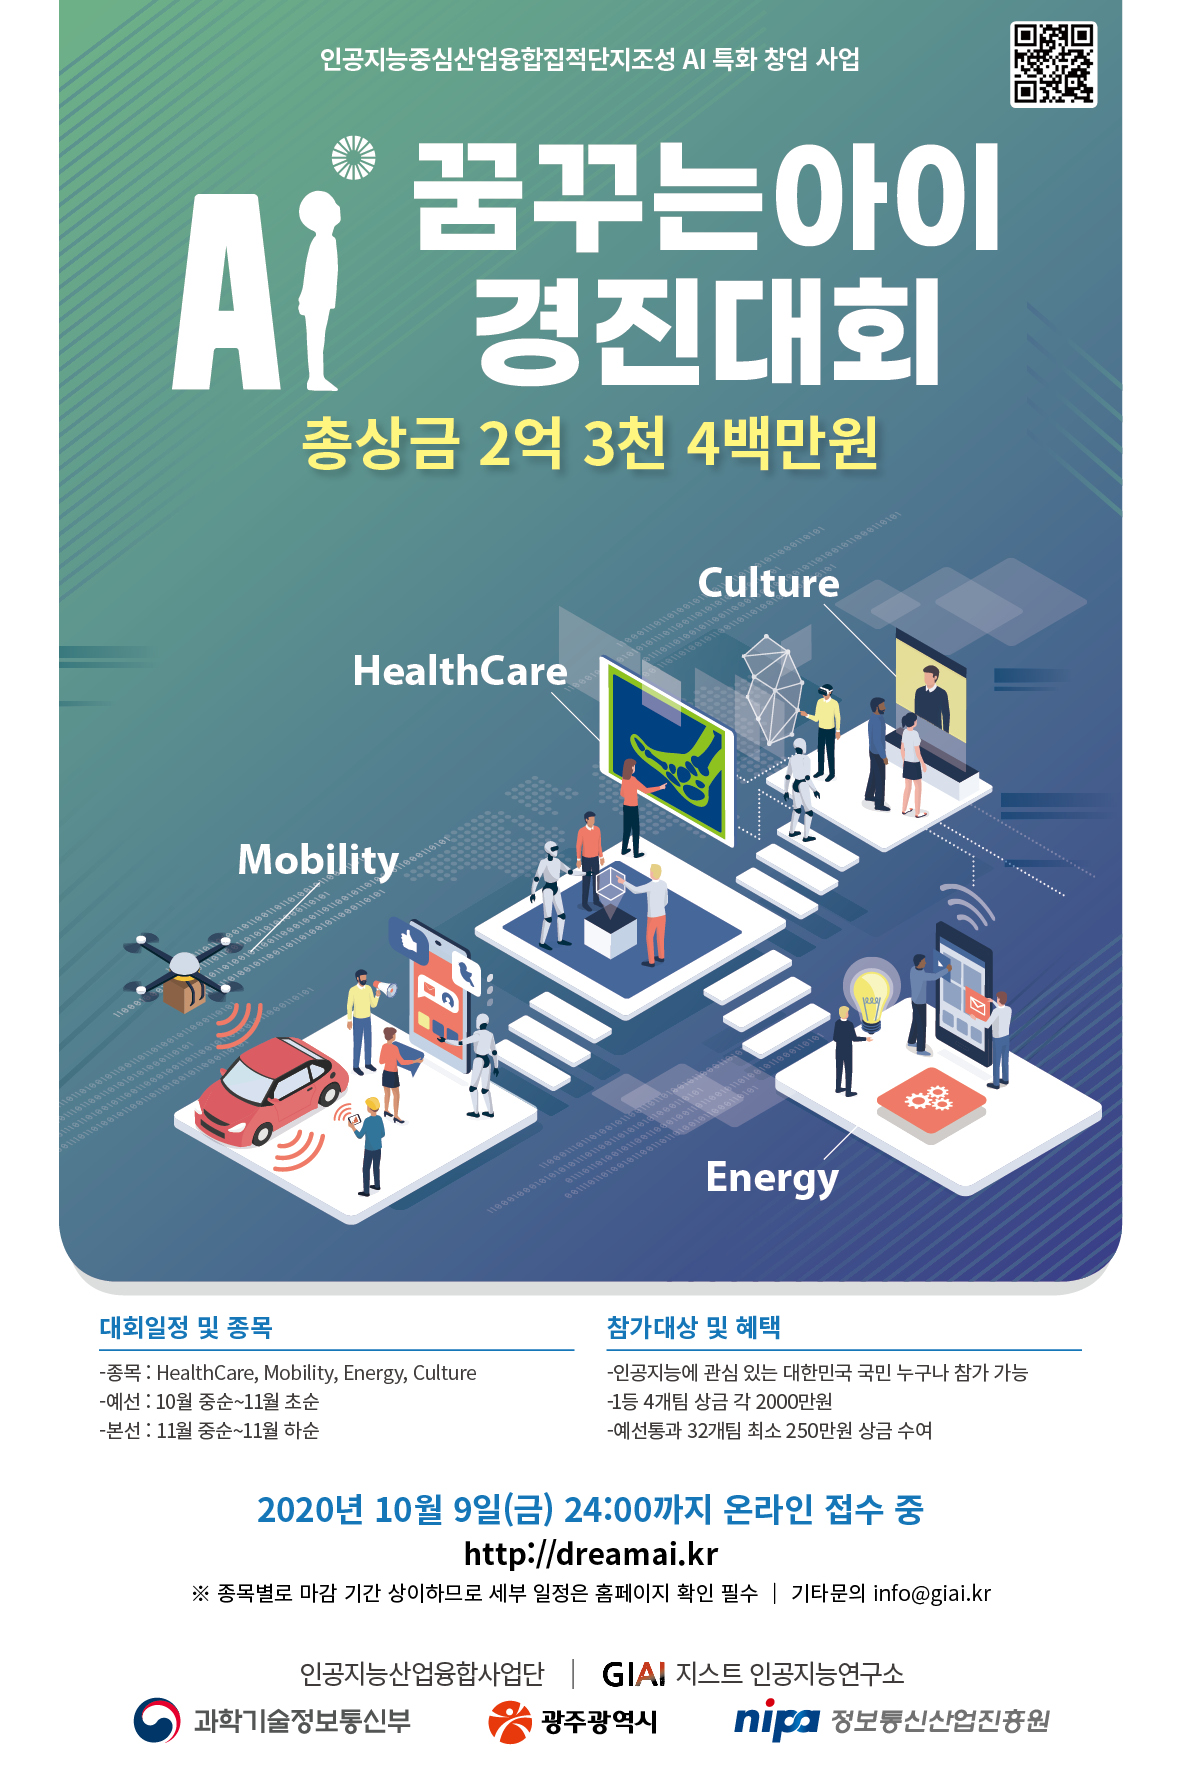 GIST to hold AI startup competition (Dreaming Child AI) 이미지